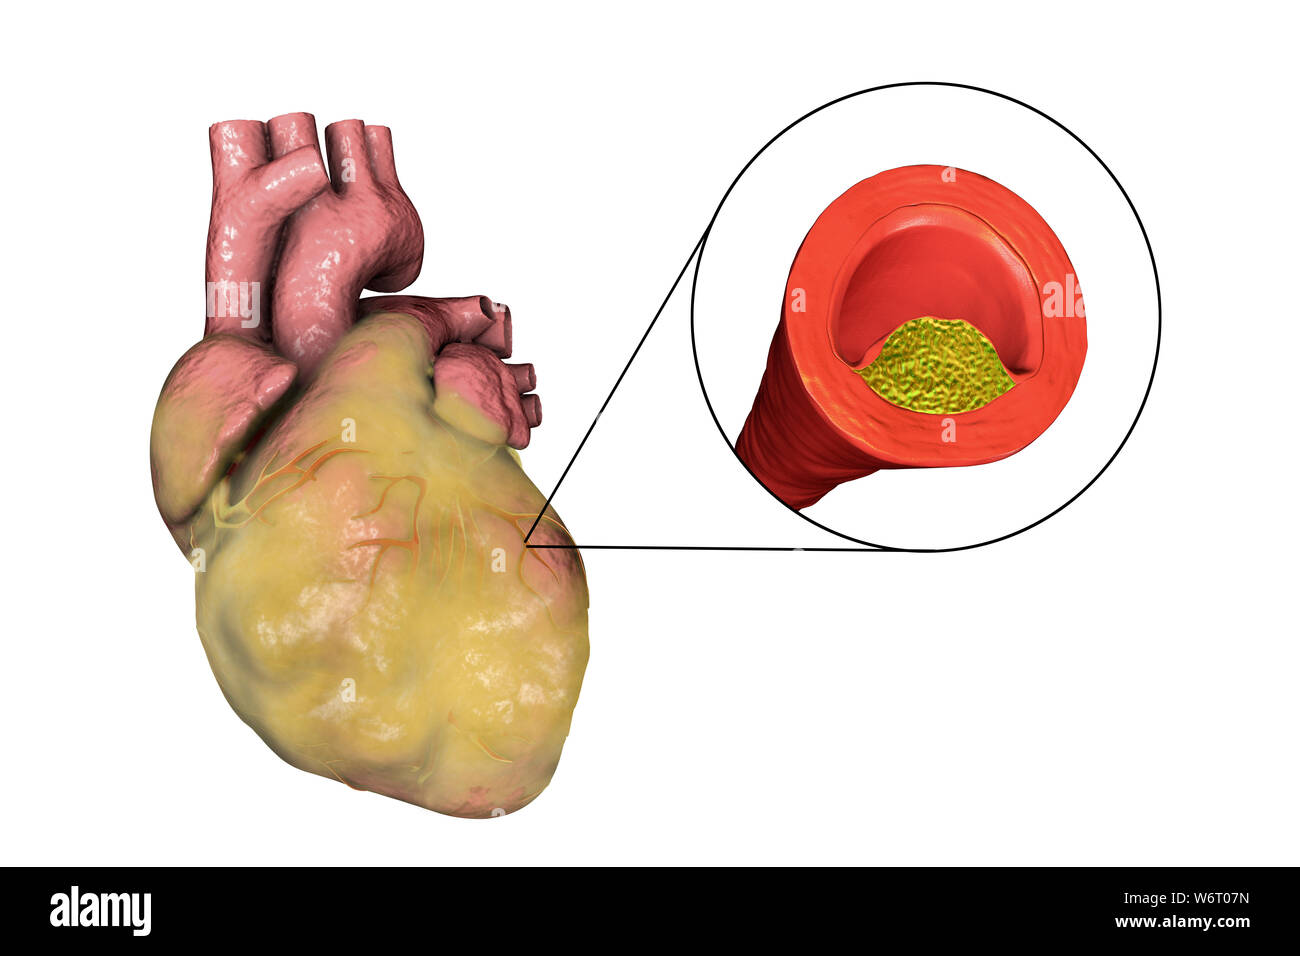 Computer illustration of a fatty heart and a coronary artery narrowed by a fatty plaque. Stock Photo